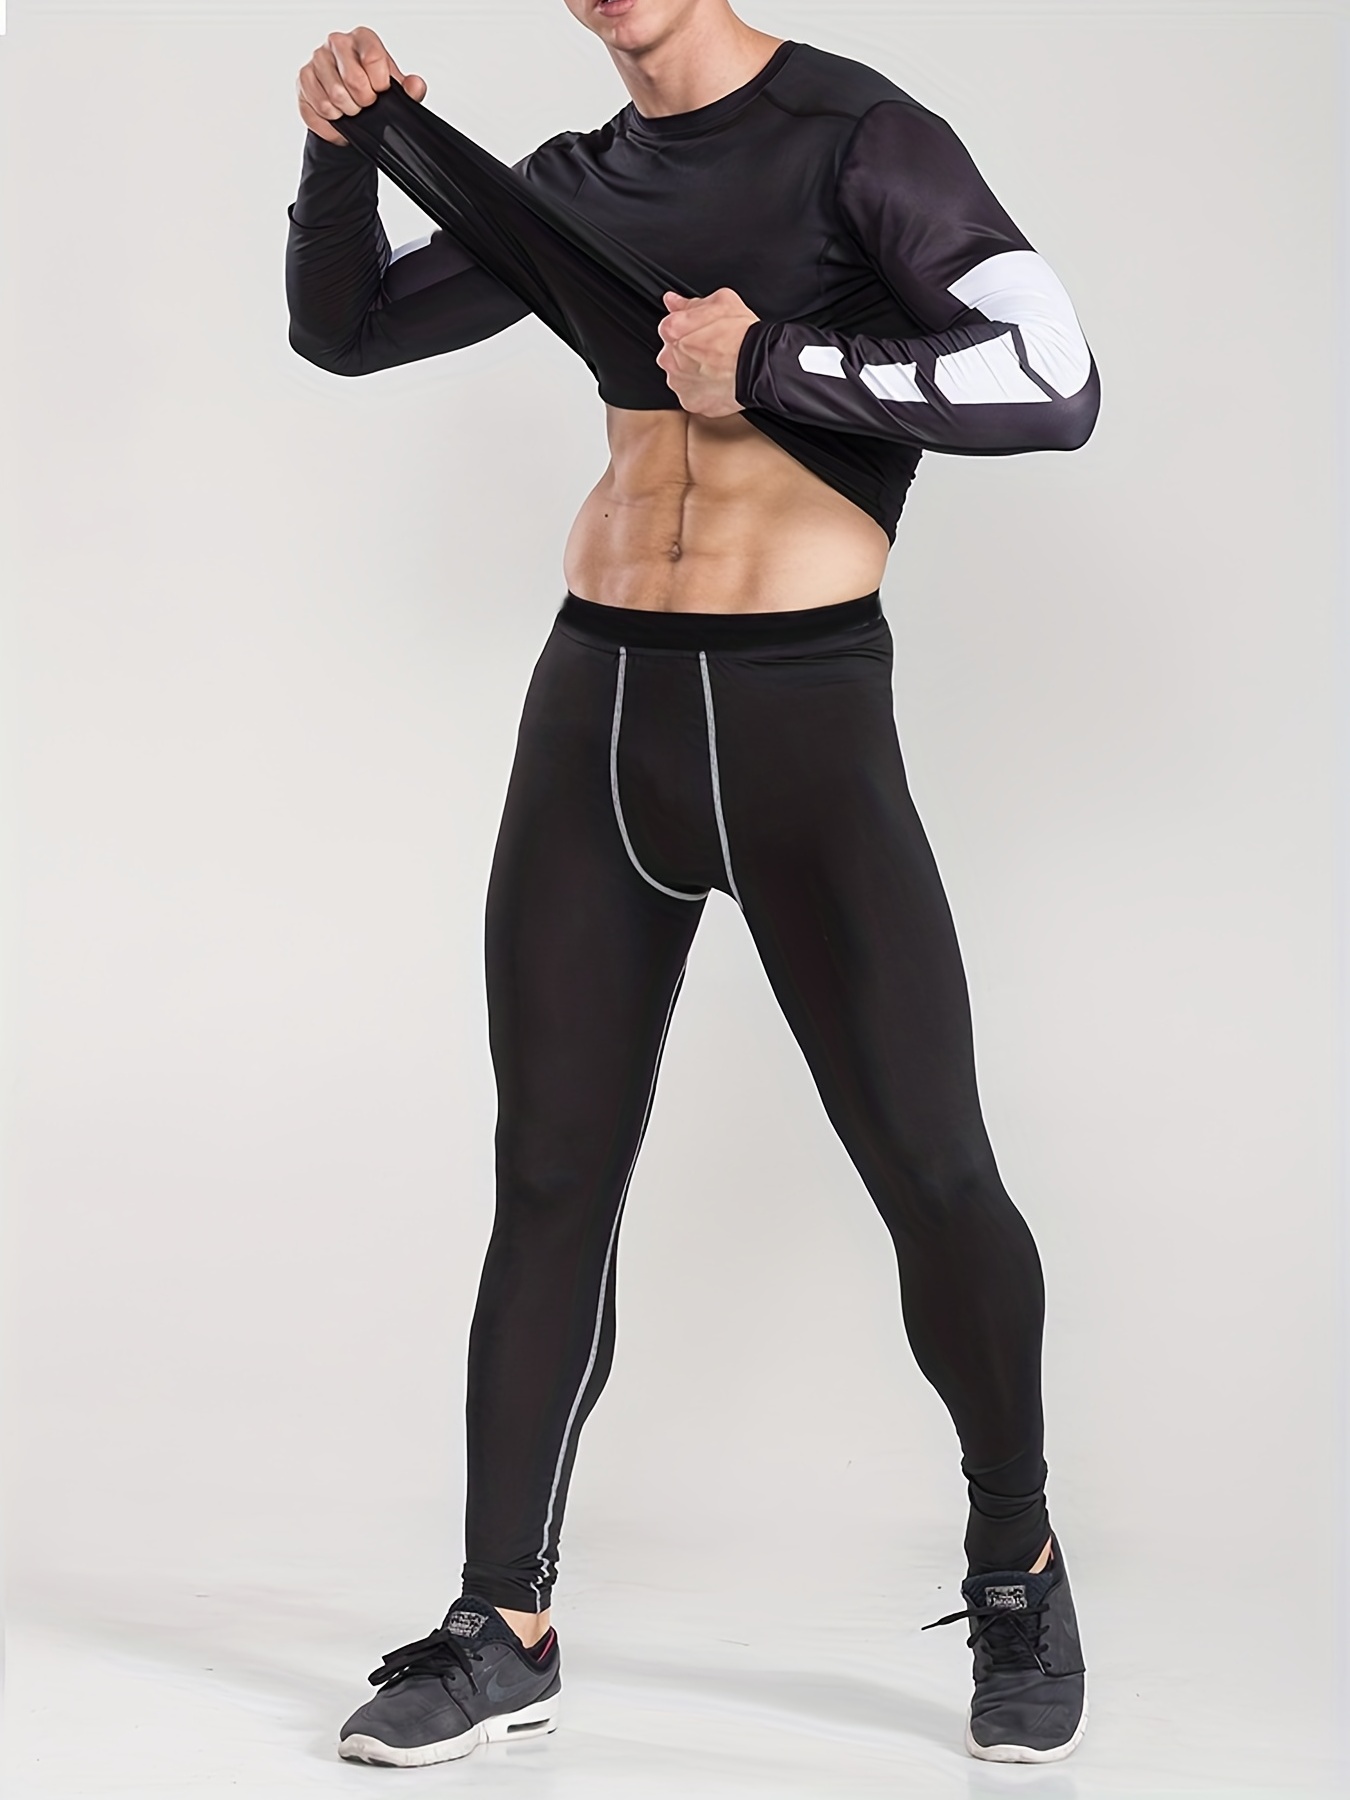 Men Compression Leggings Male Workout Football Pants with Pockets Cool Dry  Gym Running Tights